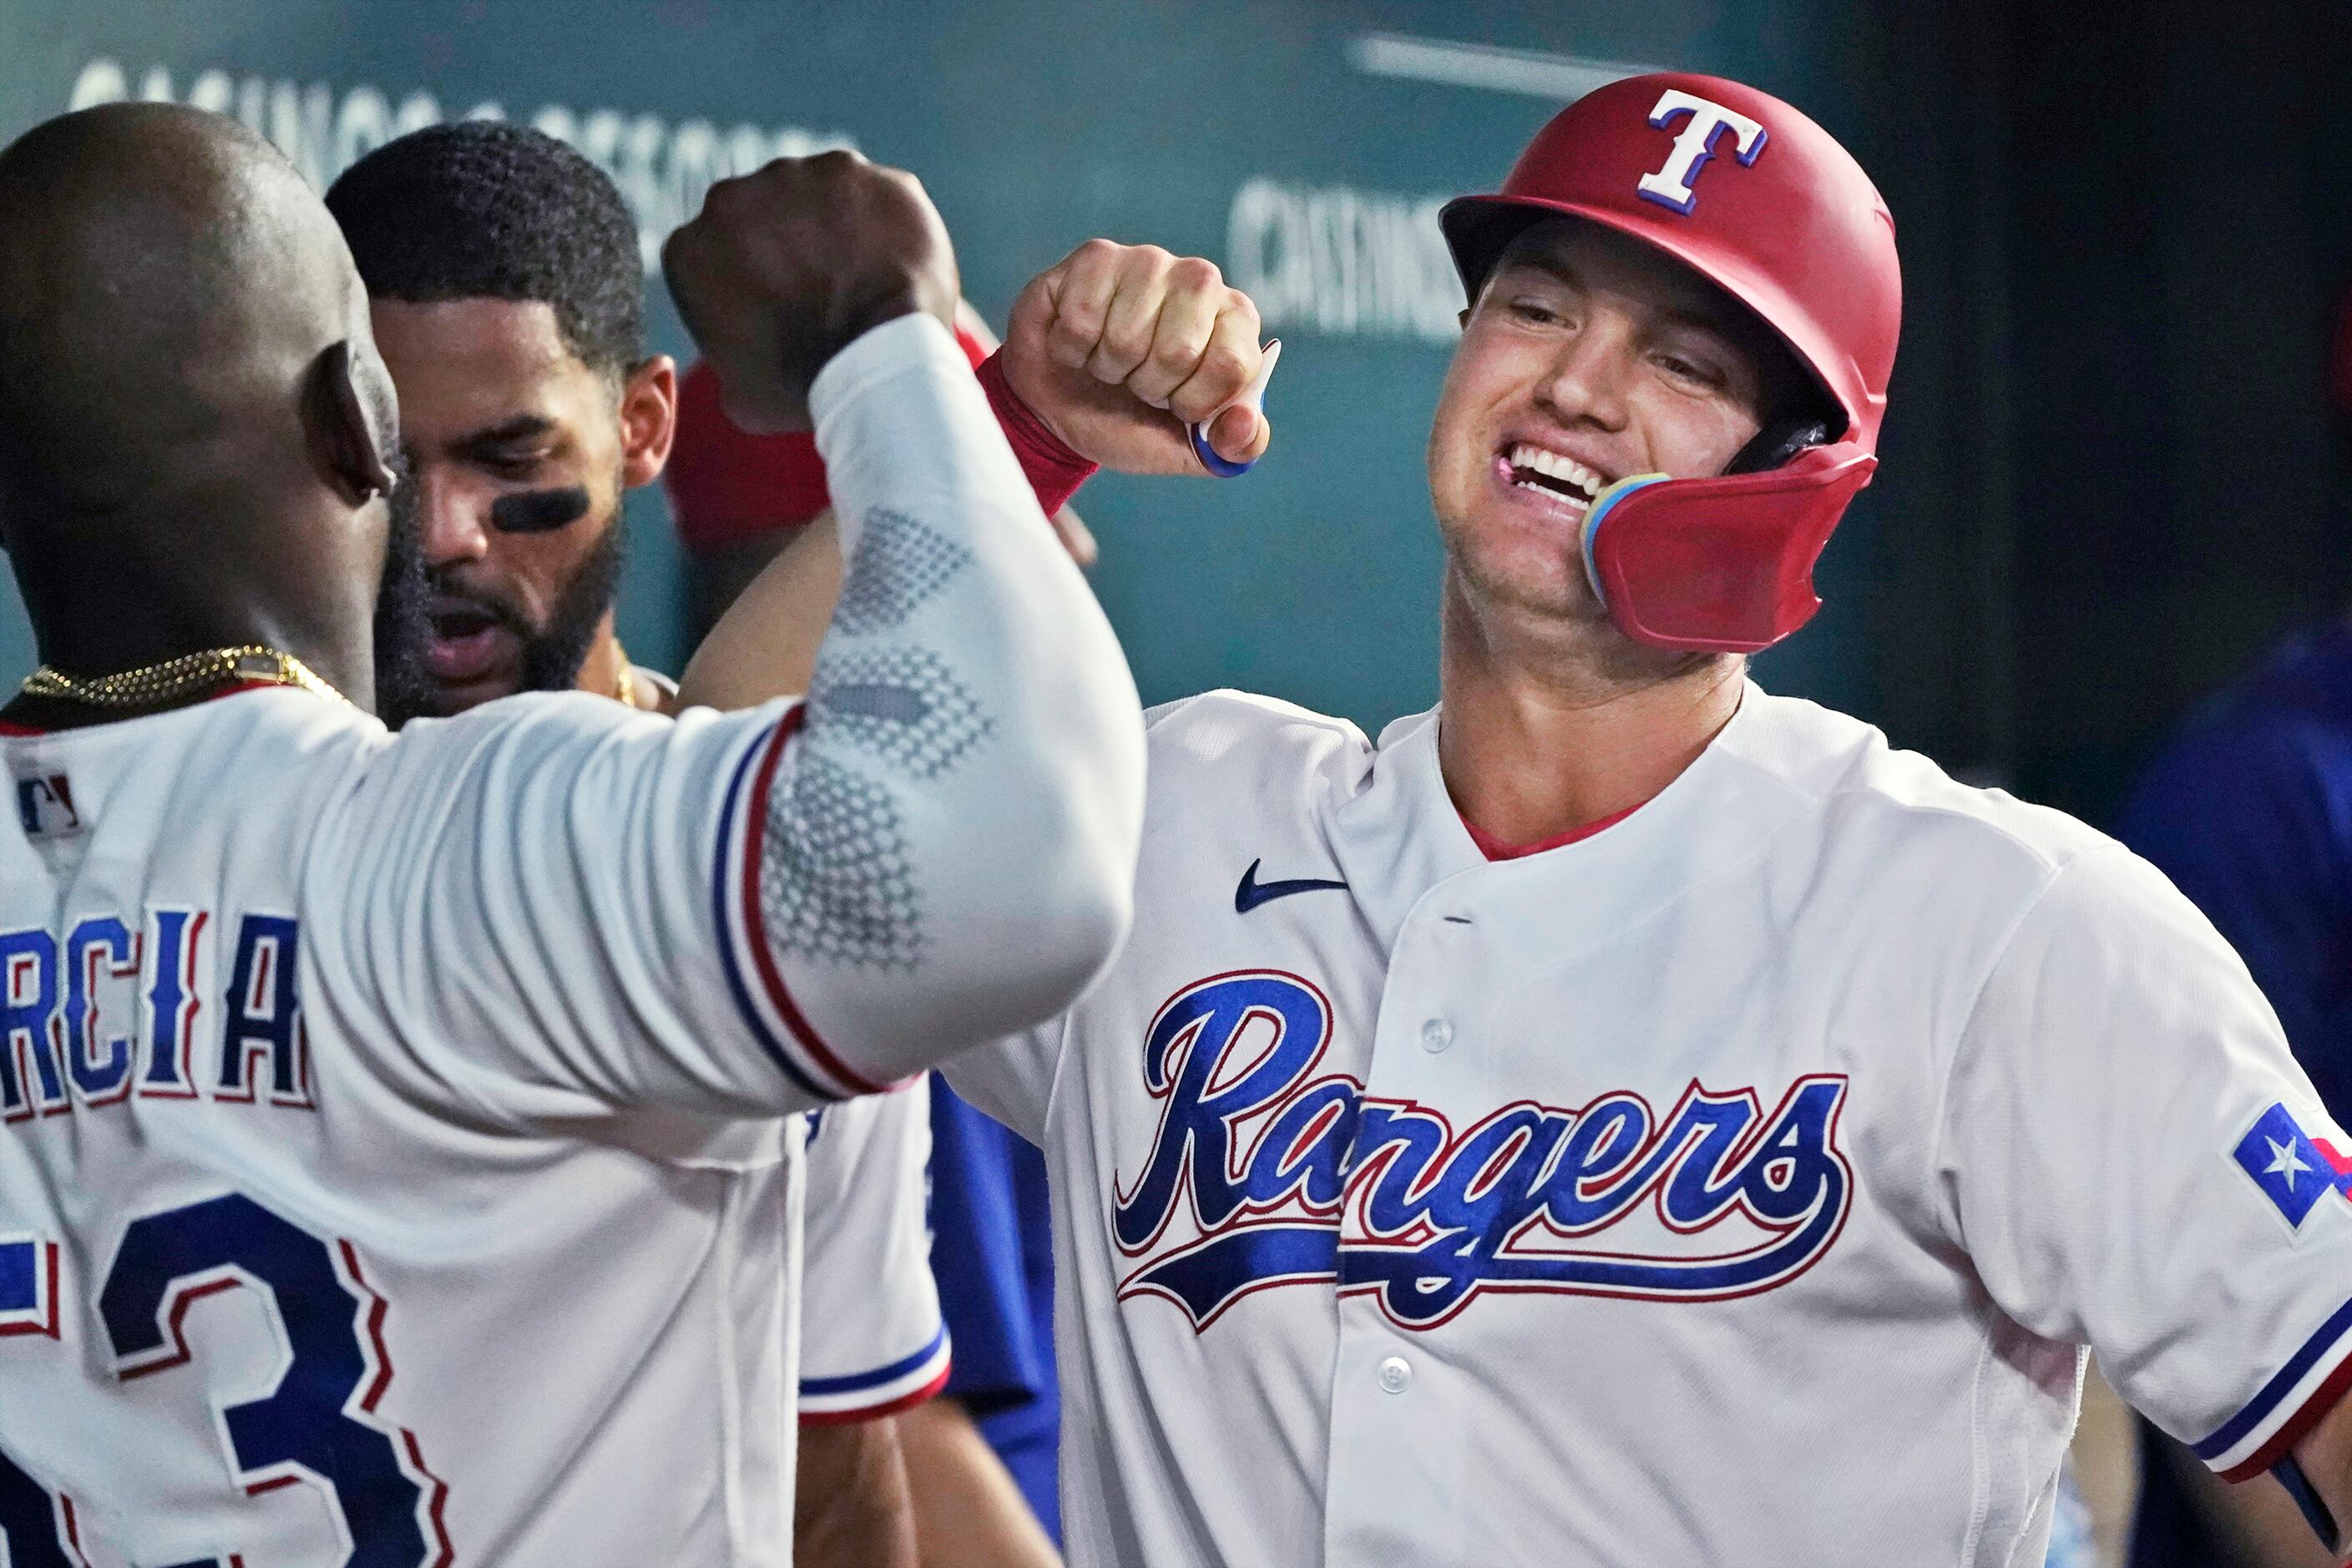 Rangers' All-Star hitters return to form vs. Nationals after